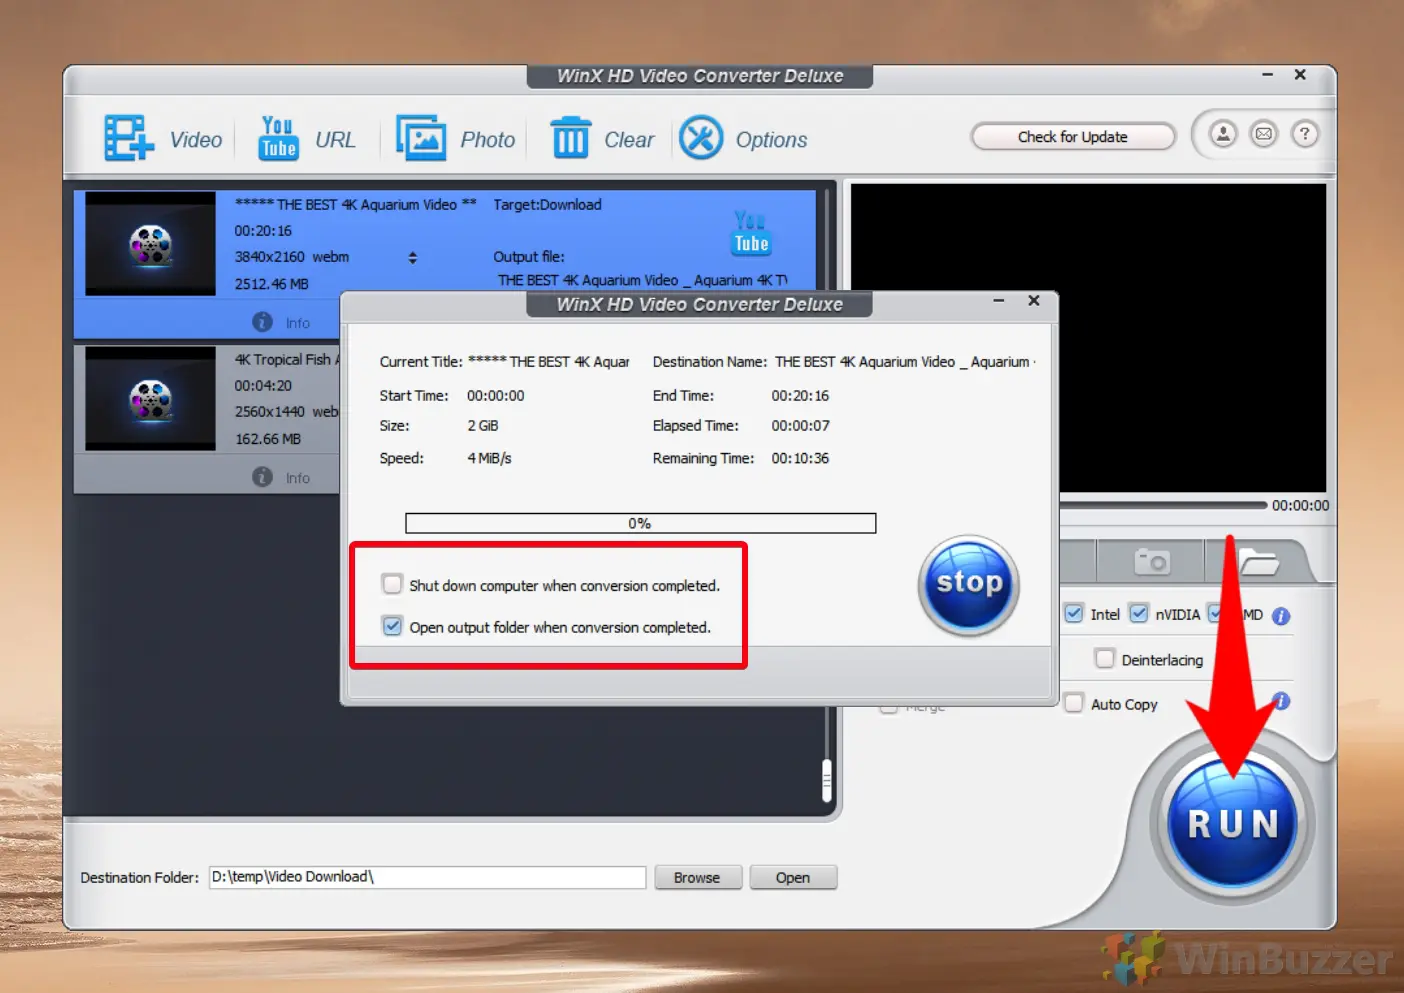 WinX HD Video Converter Deluxe - download and conversion status